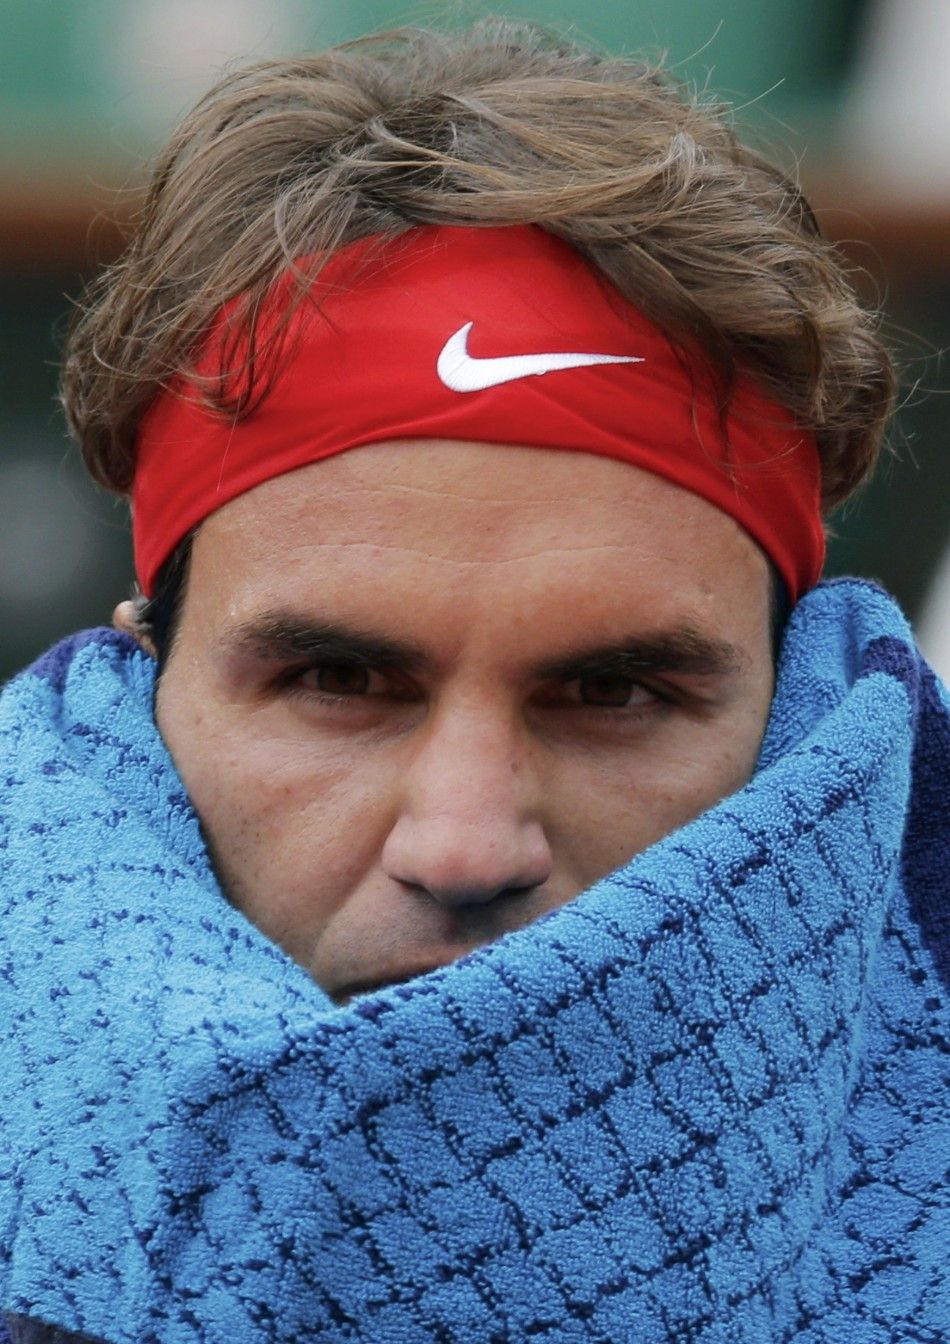 Roger Federer of Switzerland wipes his head with a towel during his mens singles match against Ernests Gulbis of Latvia at the French Open tennis tournament at the Roland Garros stadium in Paris June 1, 2014.